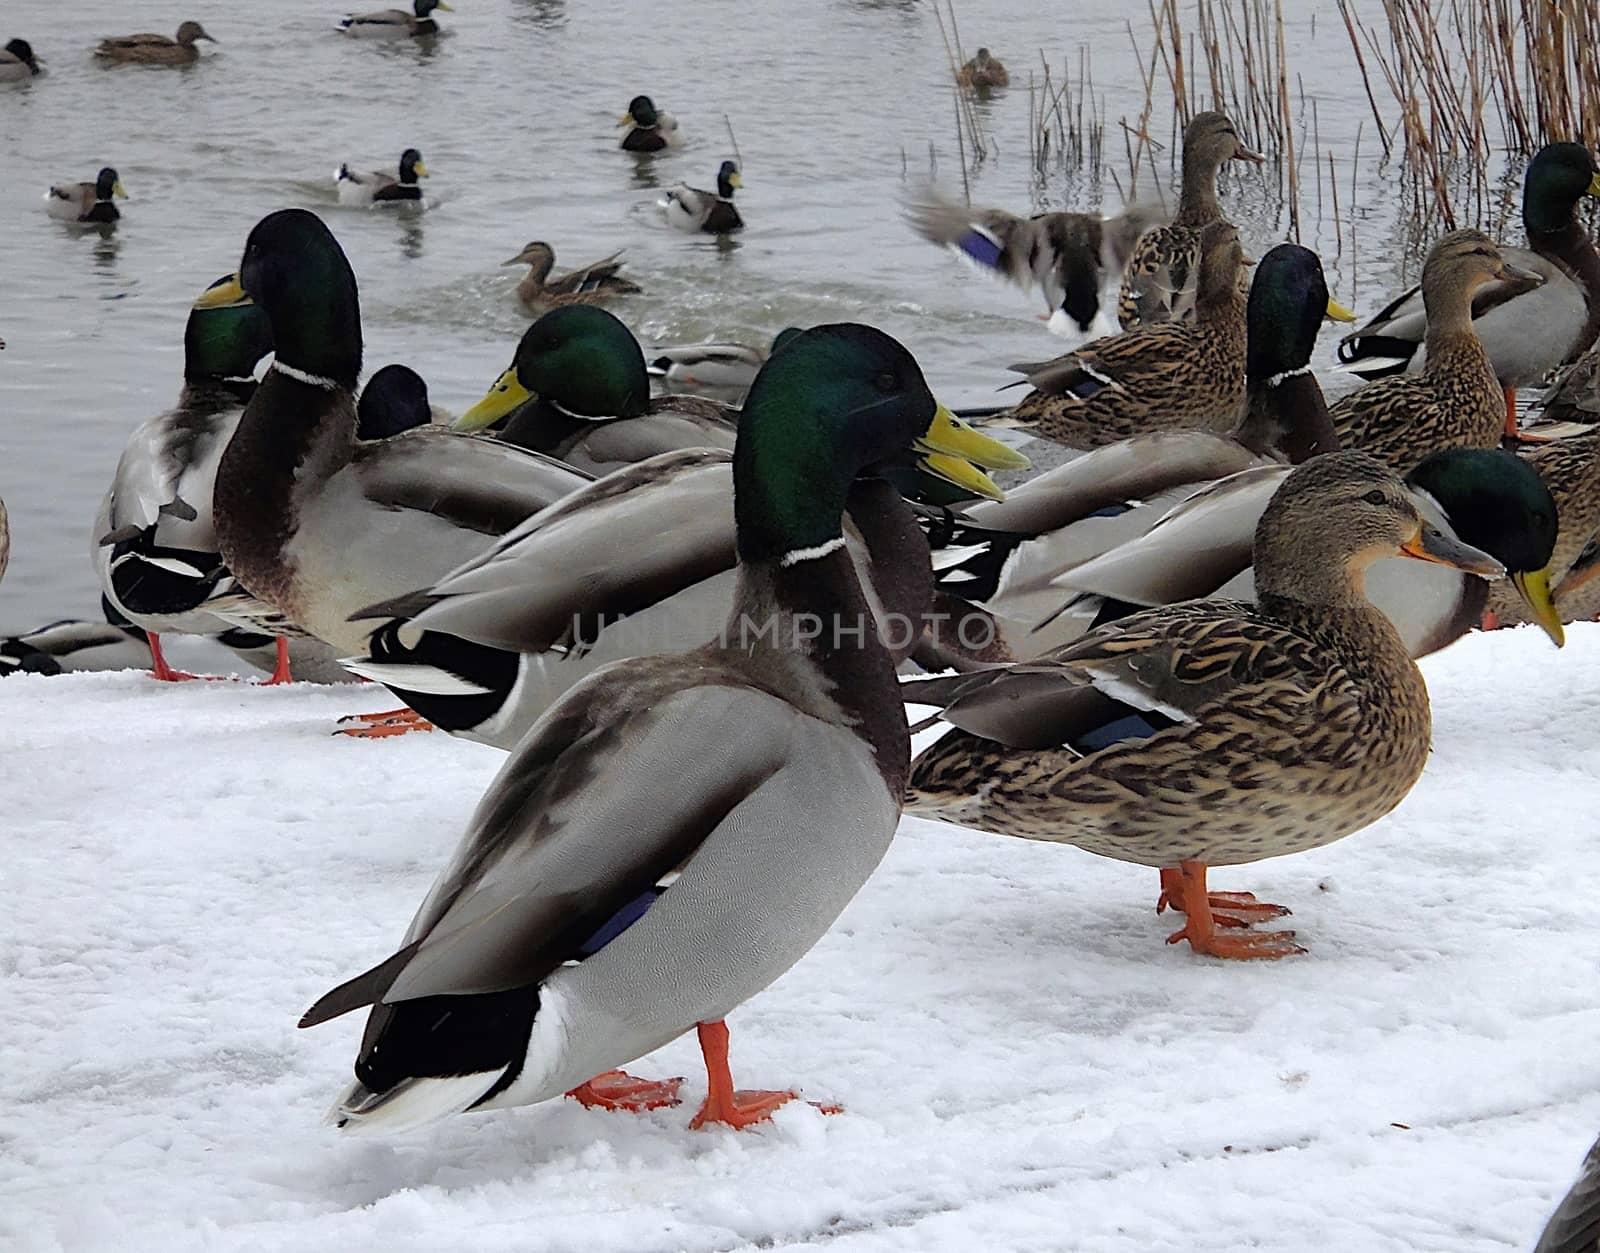 A flock of ducks at the snowed up shore.